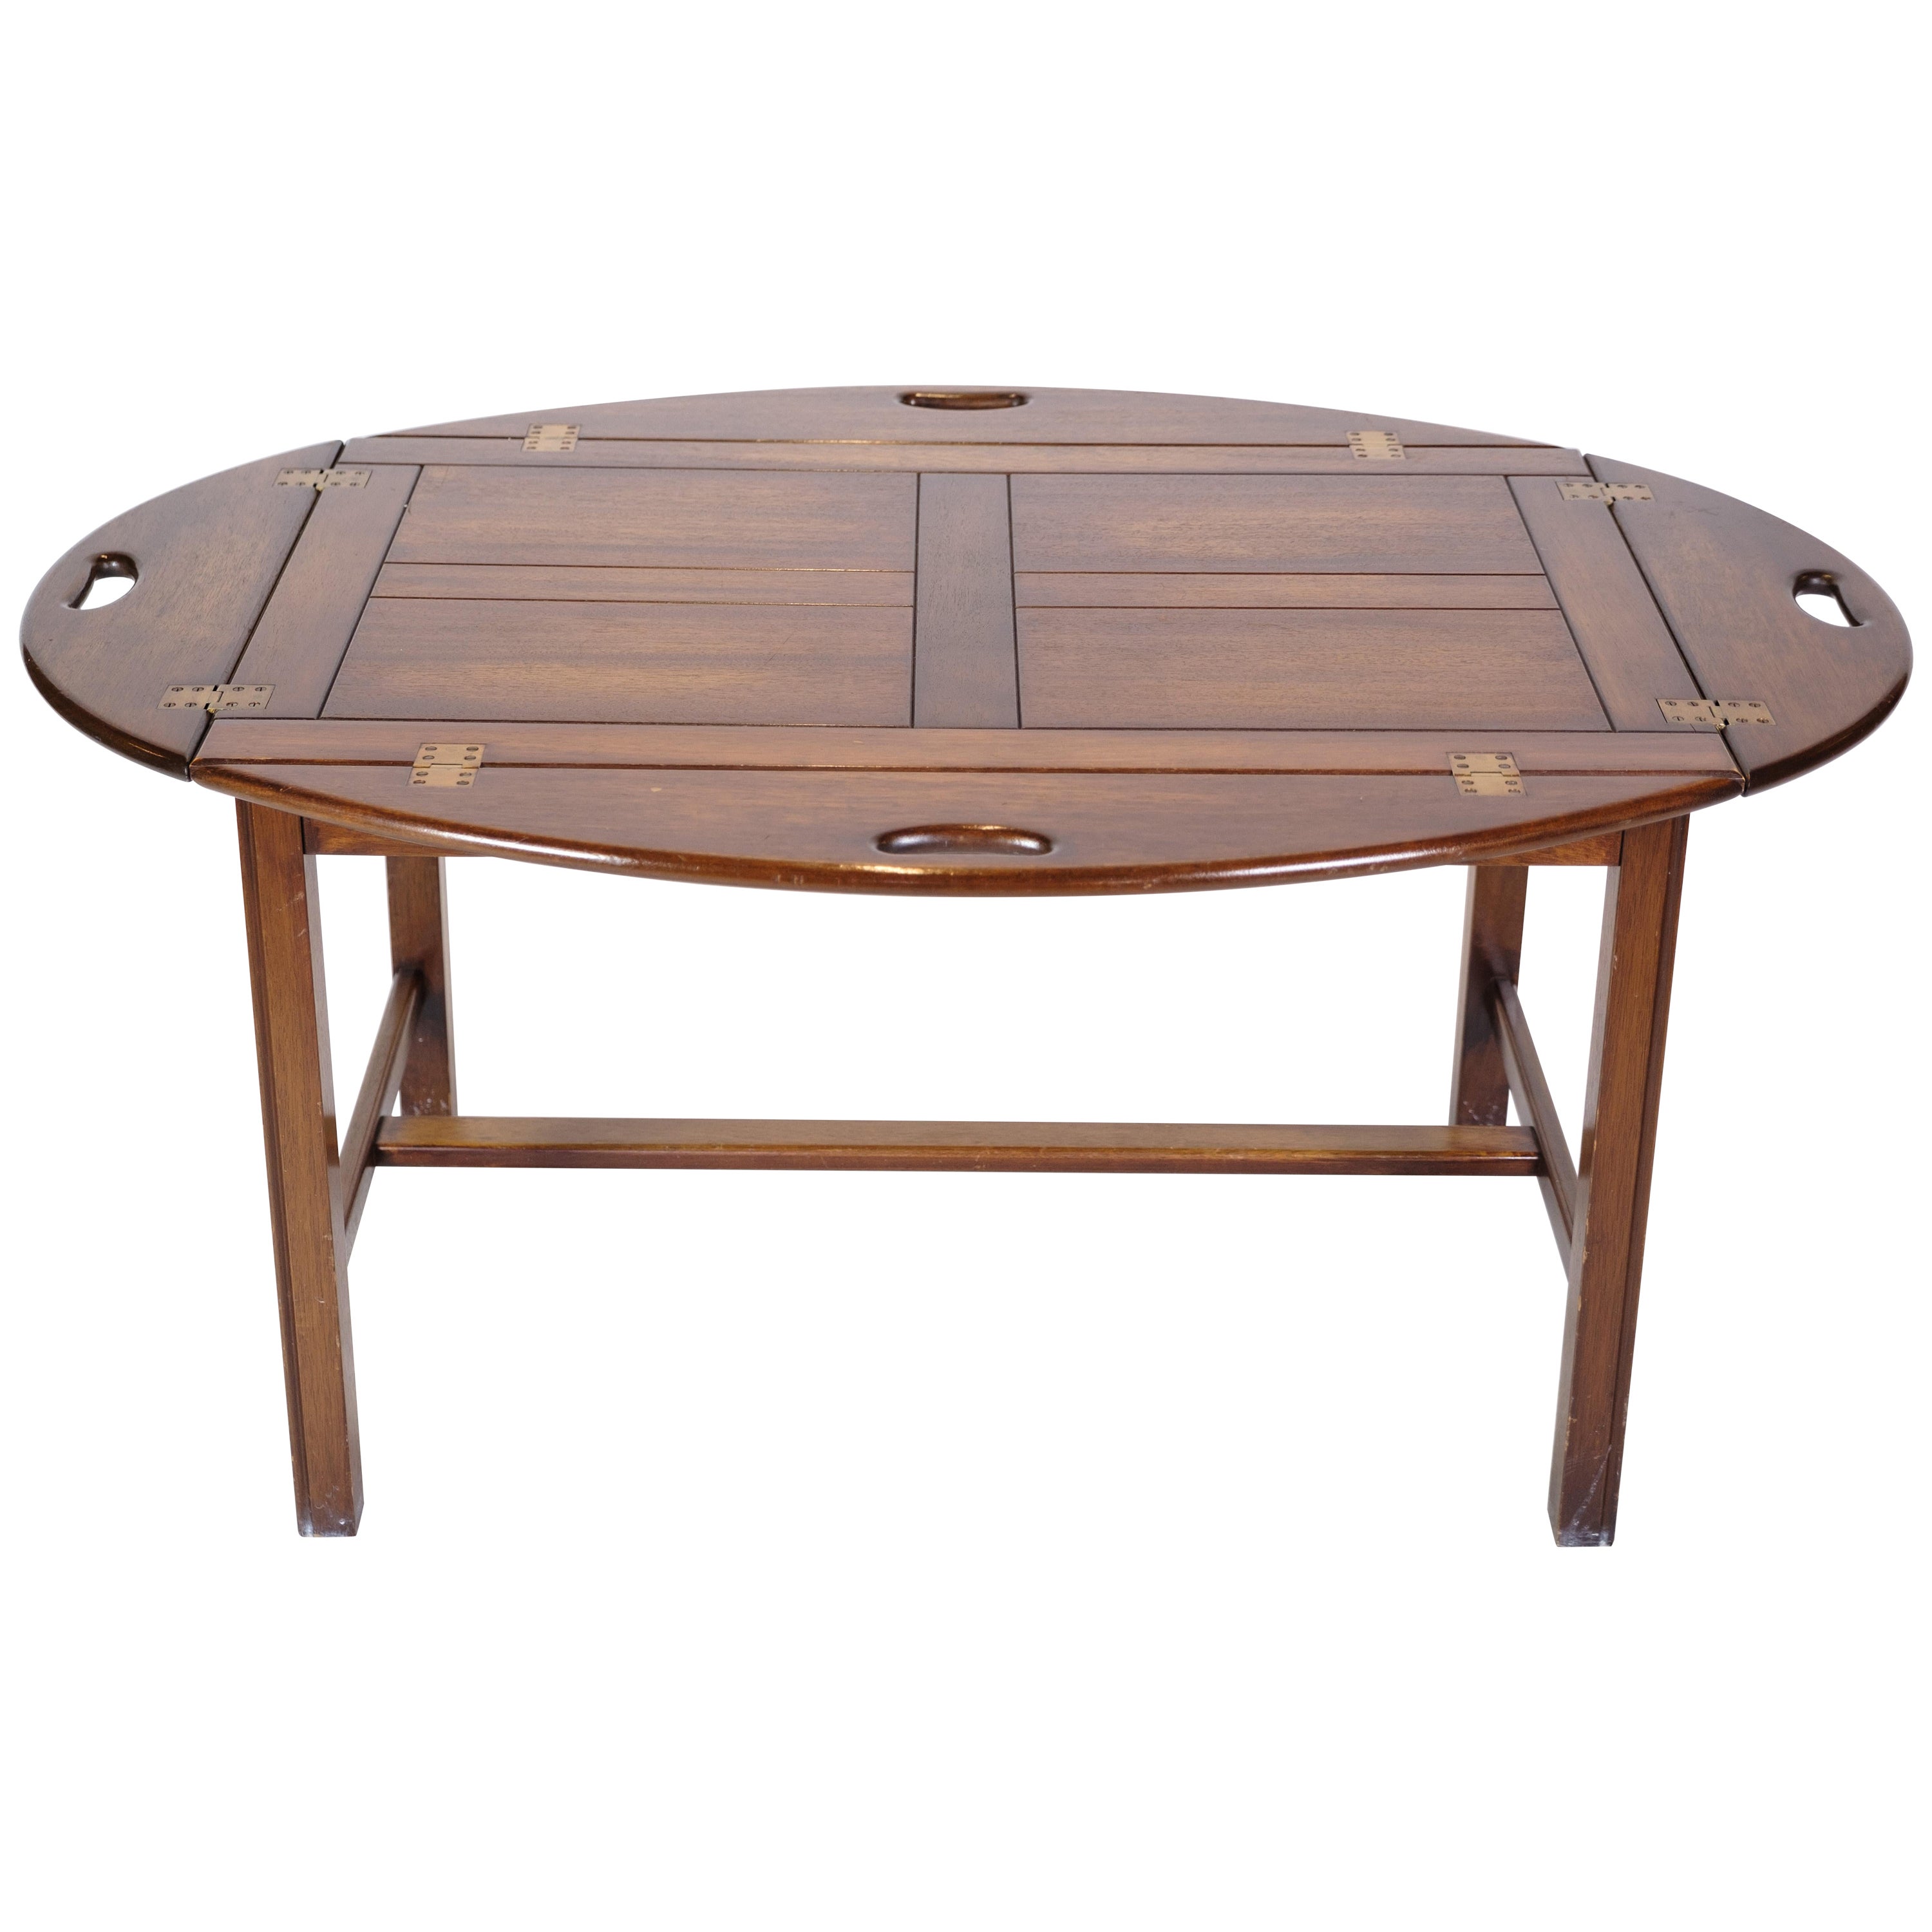 Butler table in Mahogany of Danish Design from the 1950